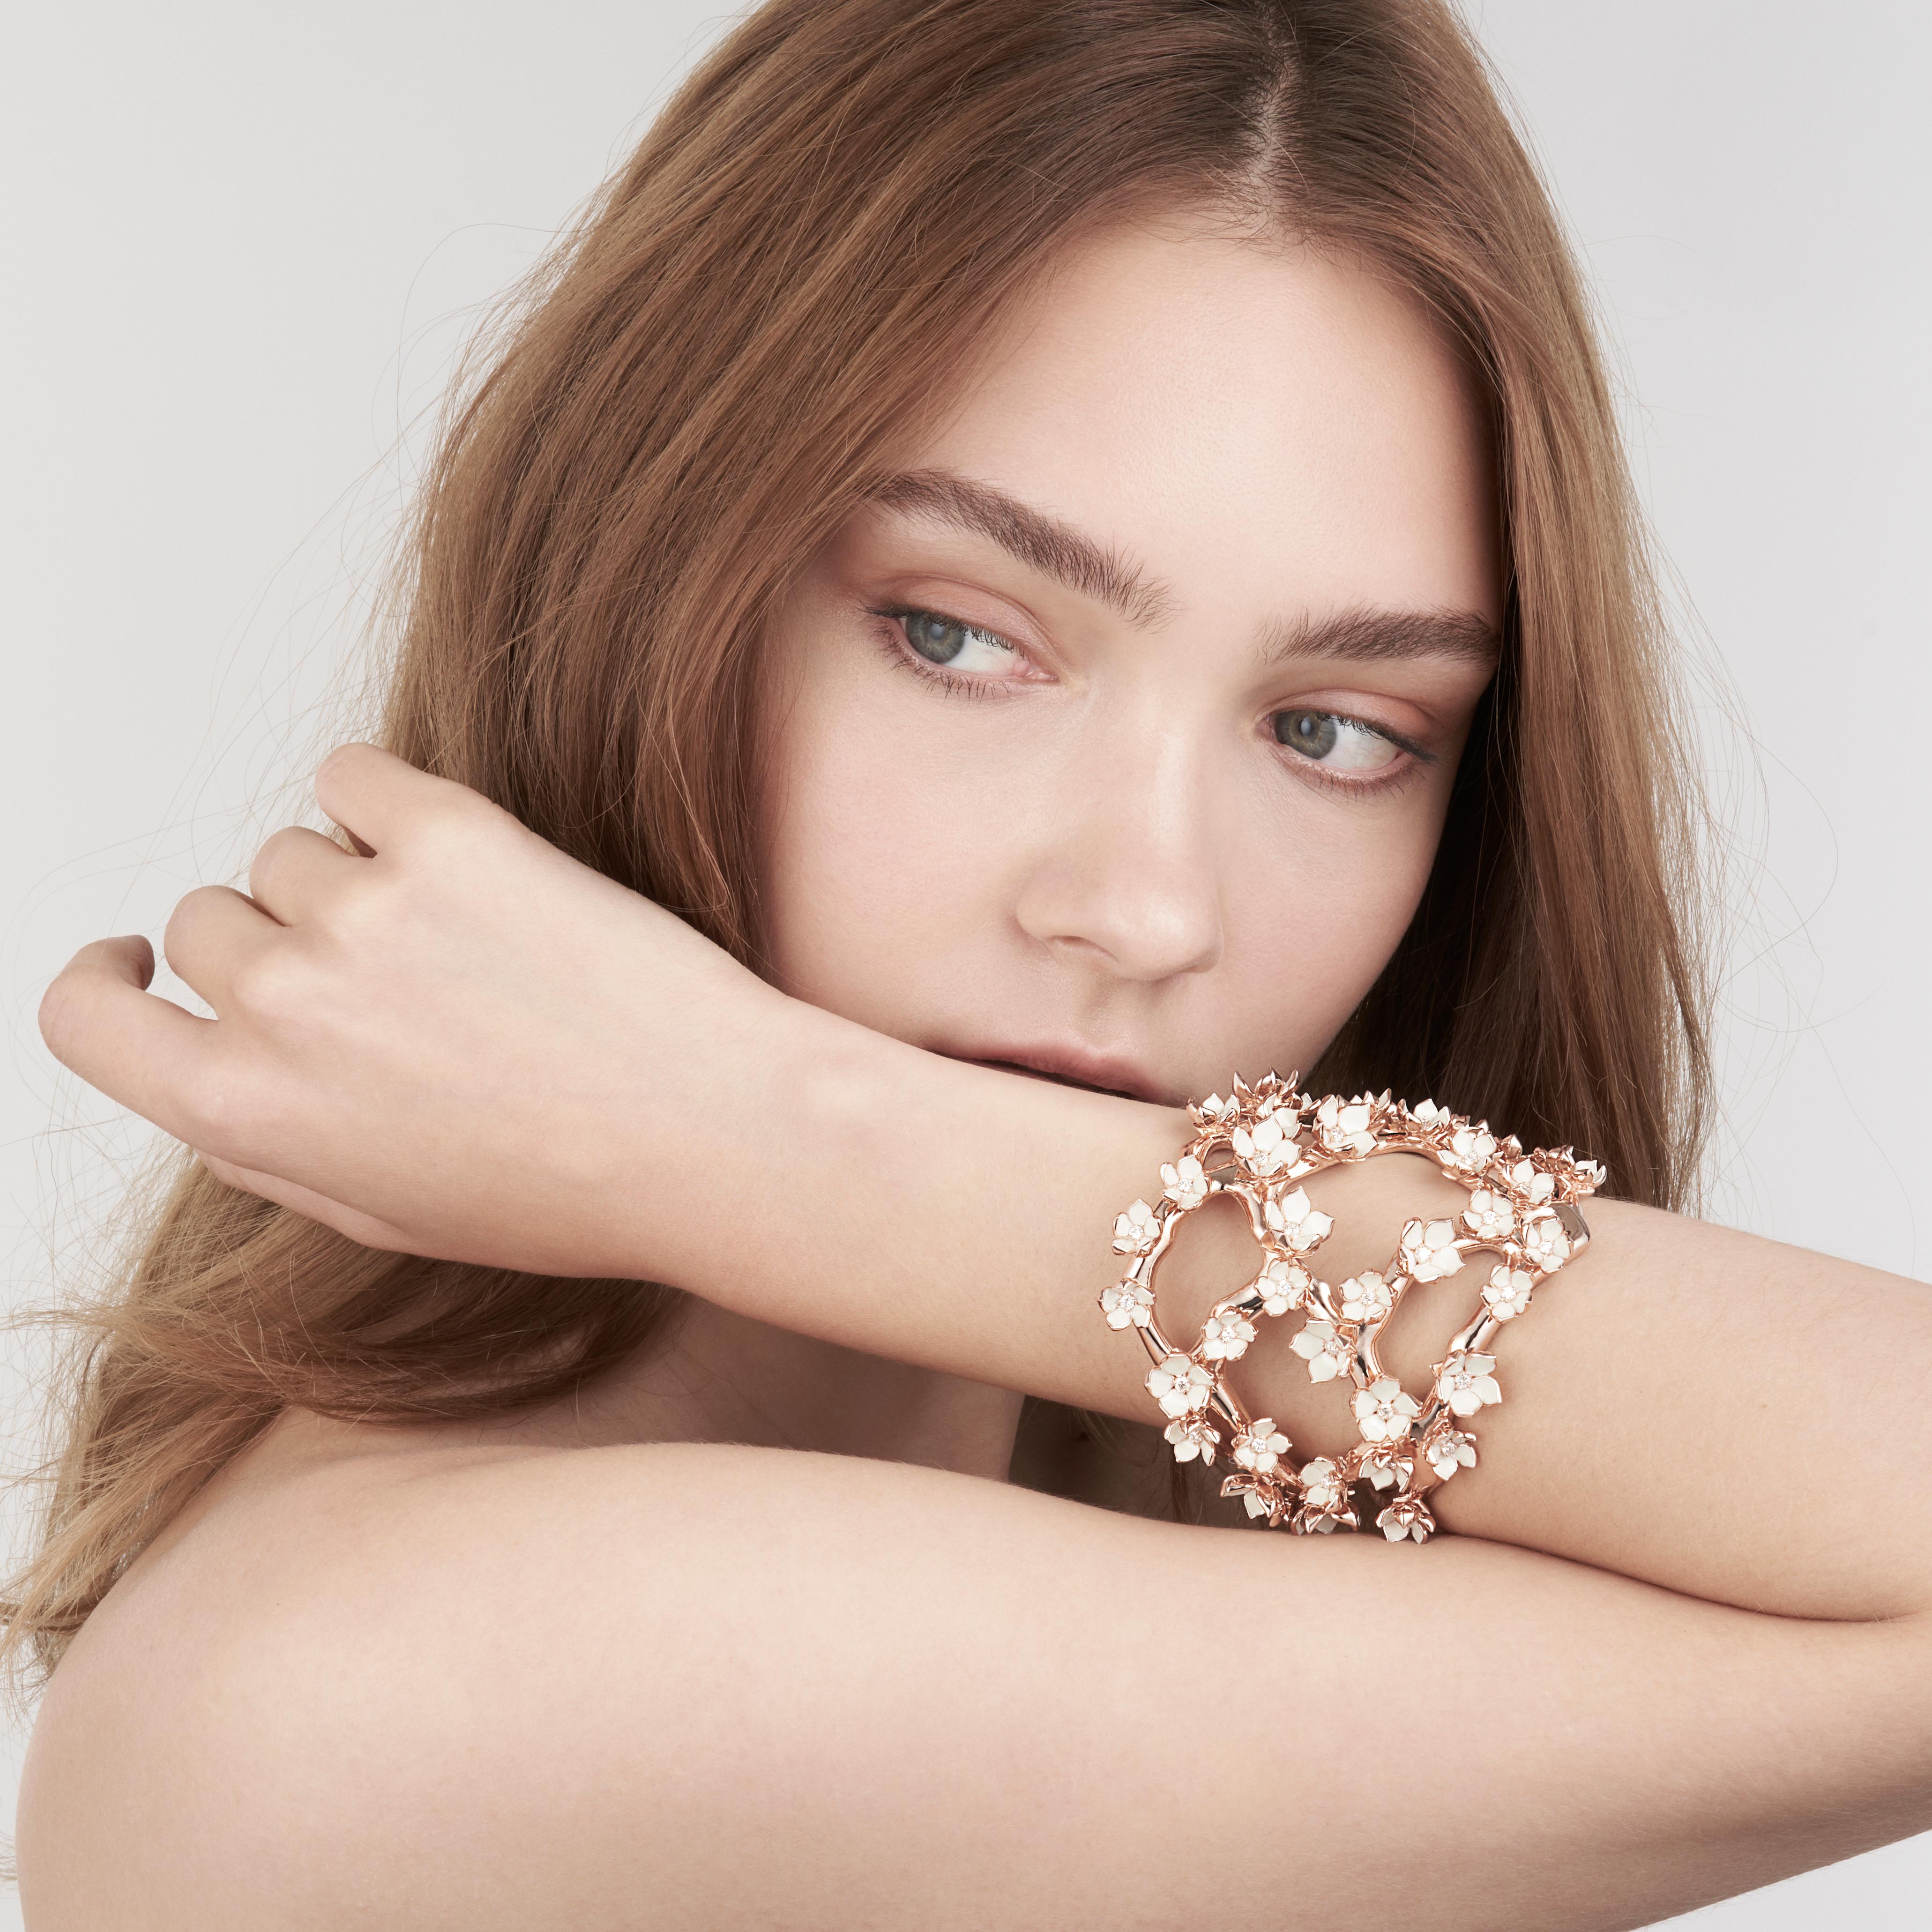 Cherry Blossom (Multi) Flower Cuff is a couture piece from the Cherry Blossom collection. Inspired by Japanese wild flora and the natural world, Cherry Blossom features timeless pieces of exceptional quality and originality. Handcrafted from rose